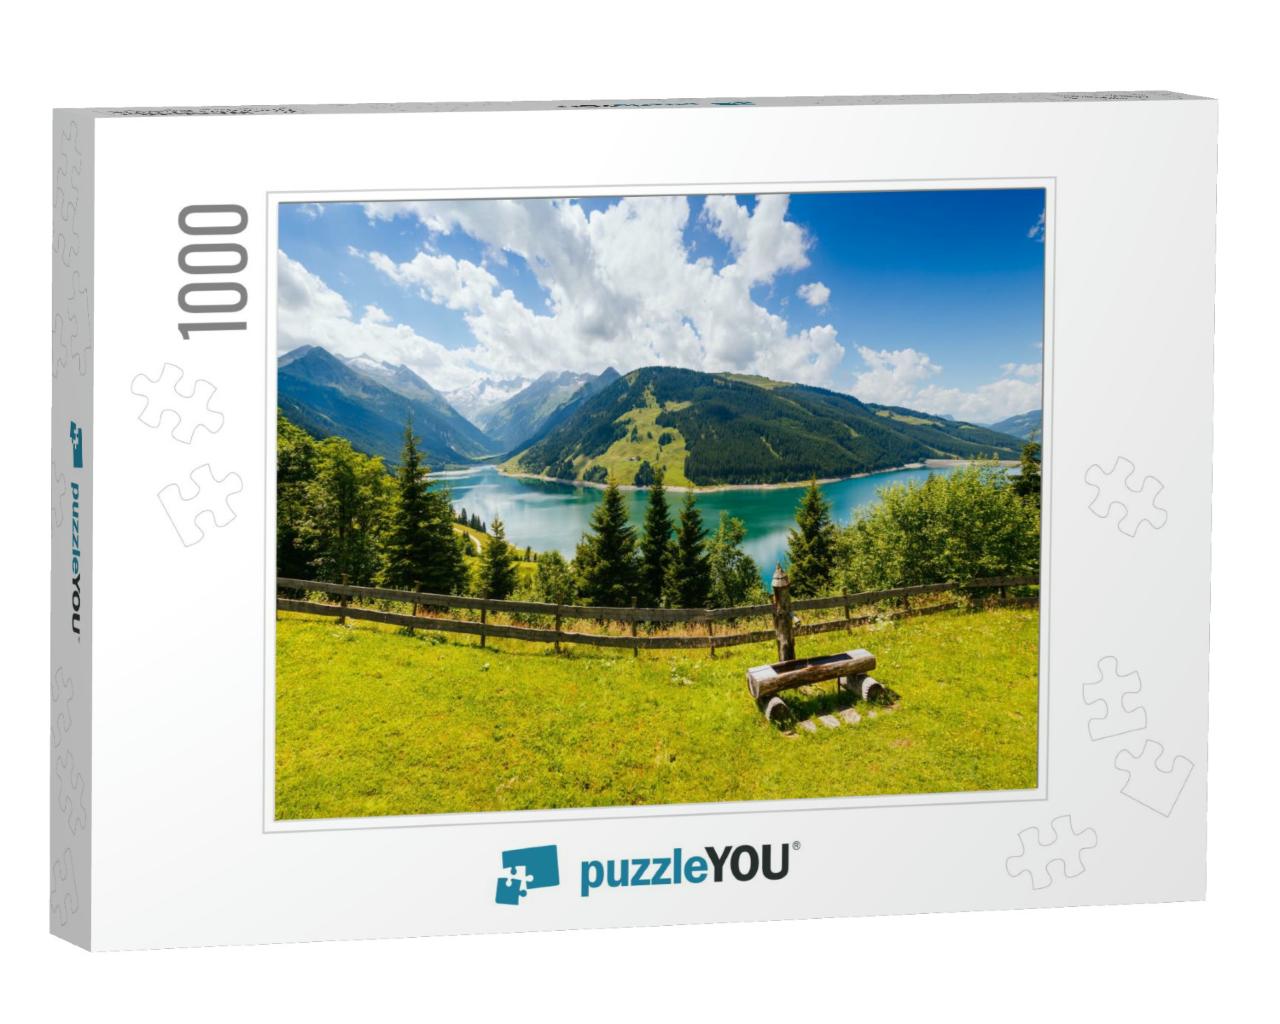 Awesome Image of the Durlassboden Reservoir. Location Mun... Jigsaw Puzzle with 1000 pieces